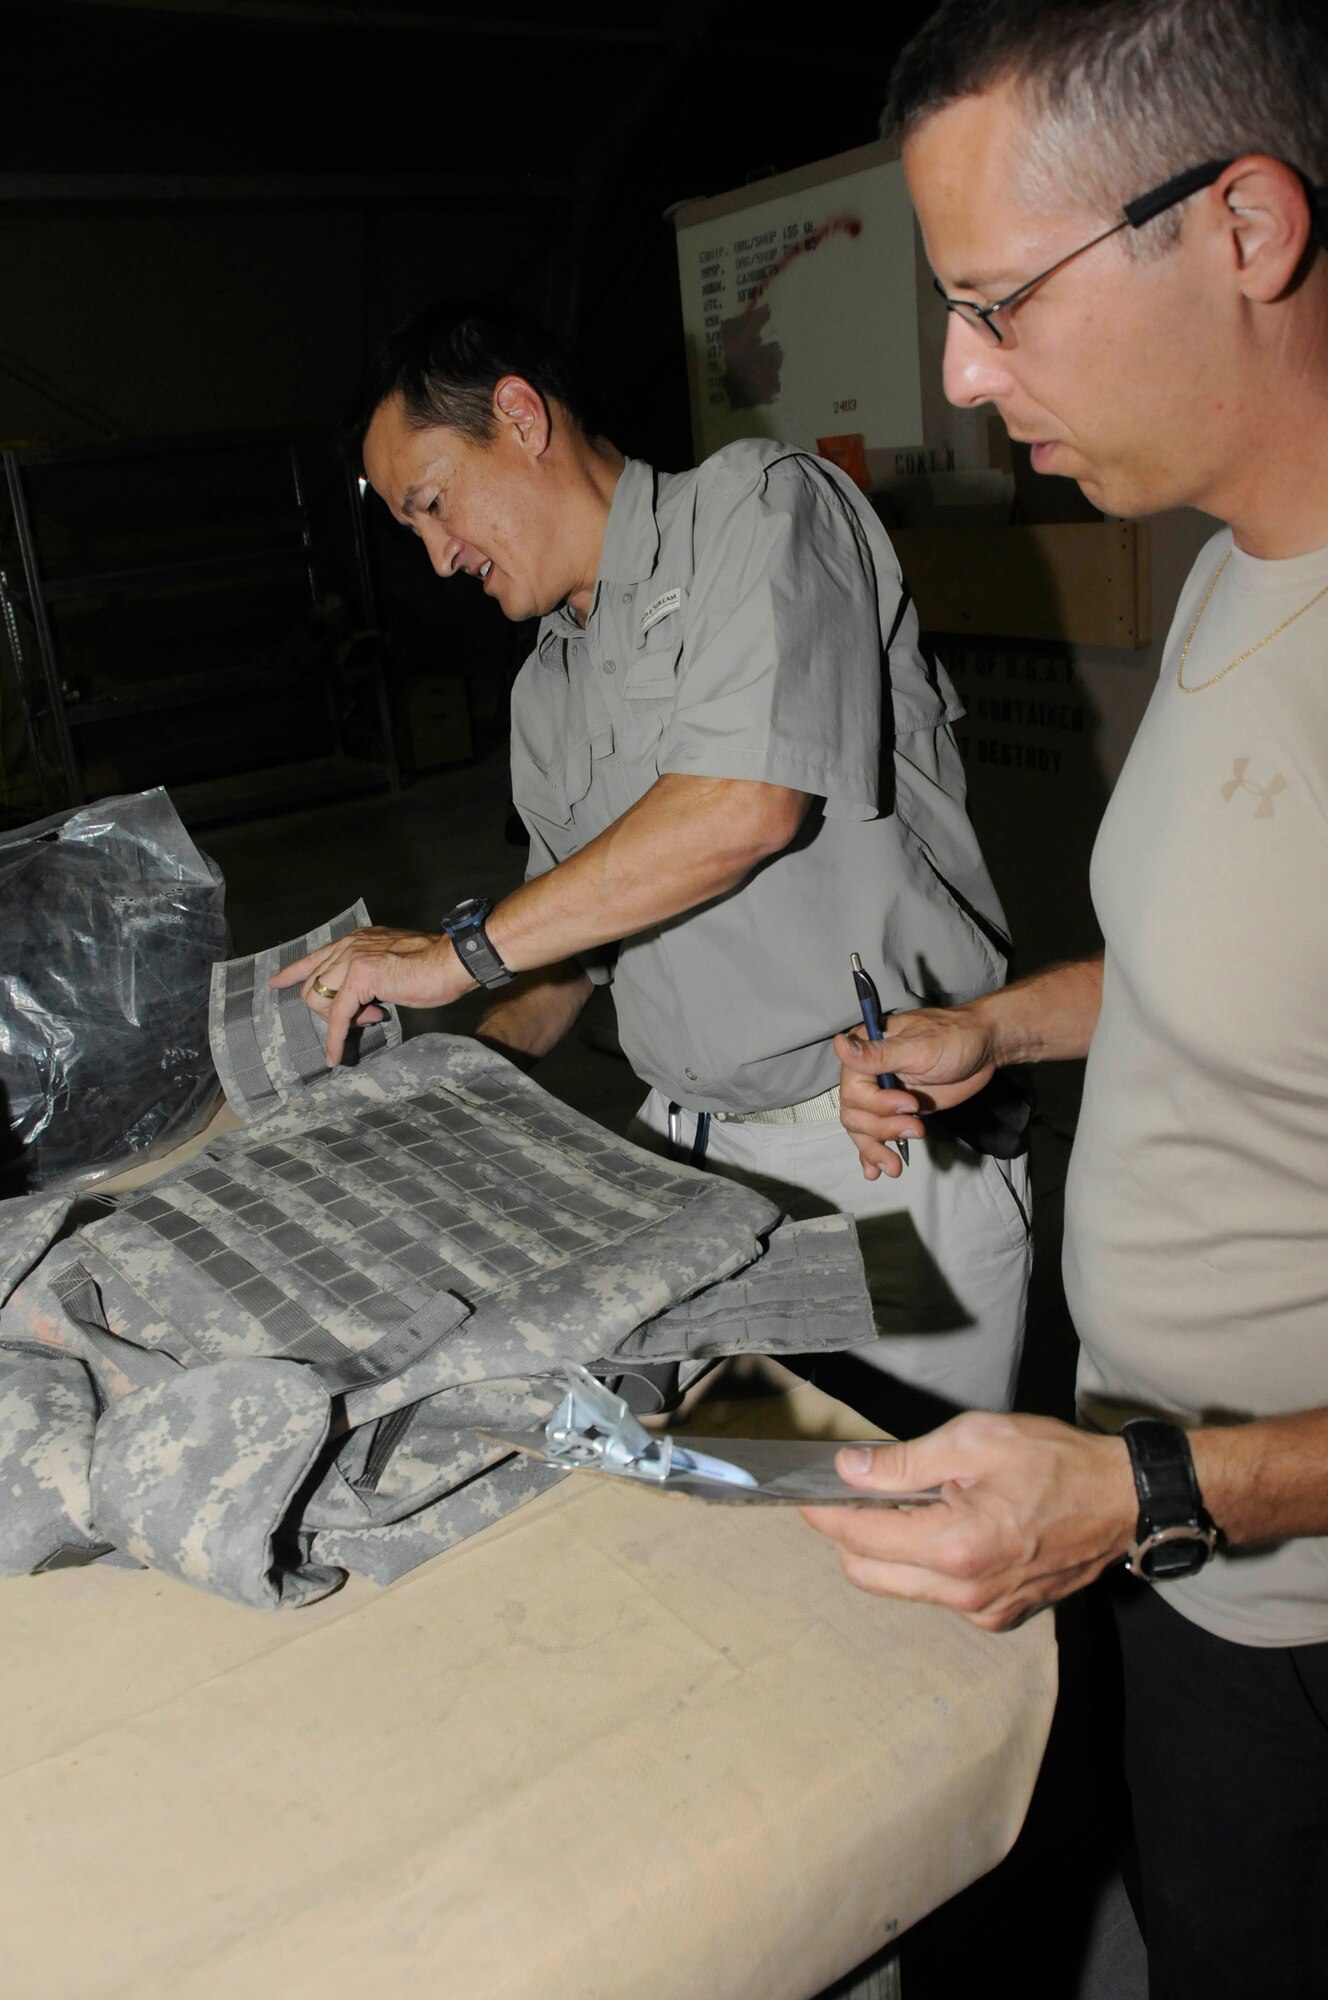 Mr. Ron Lee, logistical representative assigned to the Combined Air and Space Operations Center, conducts an inspection of combat protective gear while Mr. Jim McGreevy, also assigned to the CAOC, writes down any defects and the identifying information on an inventory sheet Sept. 29, 2008, at an undisclosed air base in Southwest Asia.  Mr. Lee, a native of Columbia, Md., is deployed from Fort Meade, Md., and Mr. McGreevy, a native of Fort Meade, Md., is deployed from Fort Meade, Md.  Both are deployed supporting Operations Iraqi and Enduring Freedom and Joint Task Force-Horn of Africa. (U.S. Air Force photo by Staff Sgt. Darnell T. Cannady)